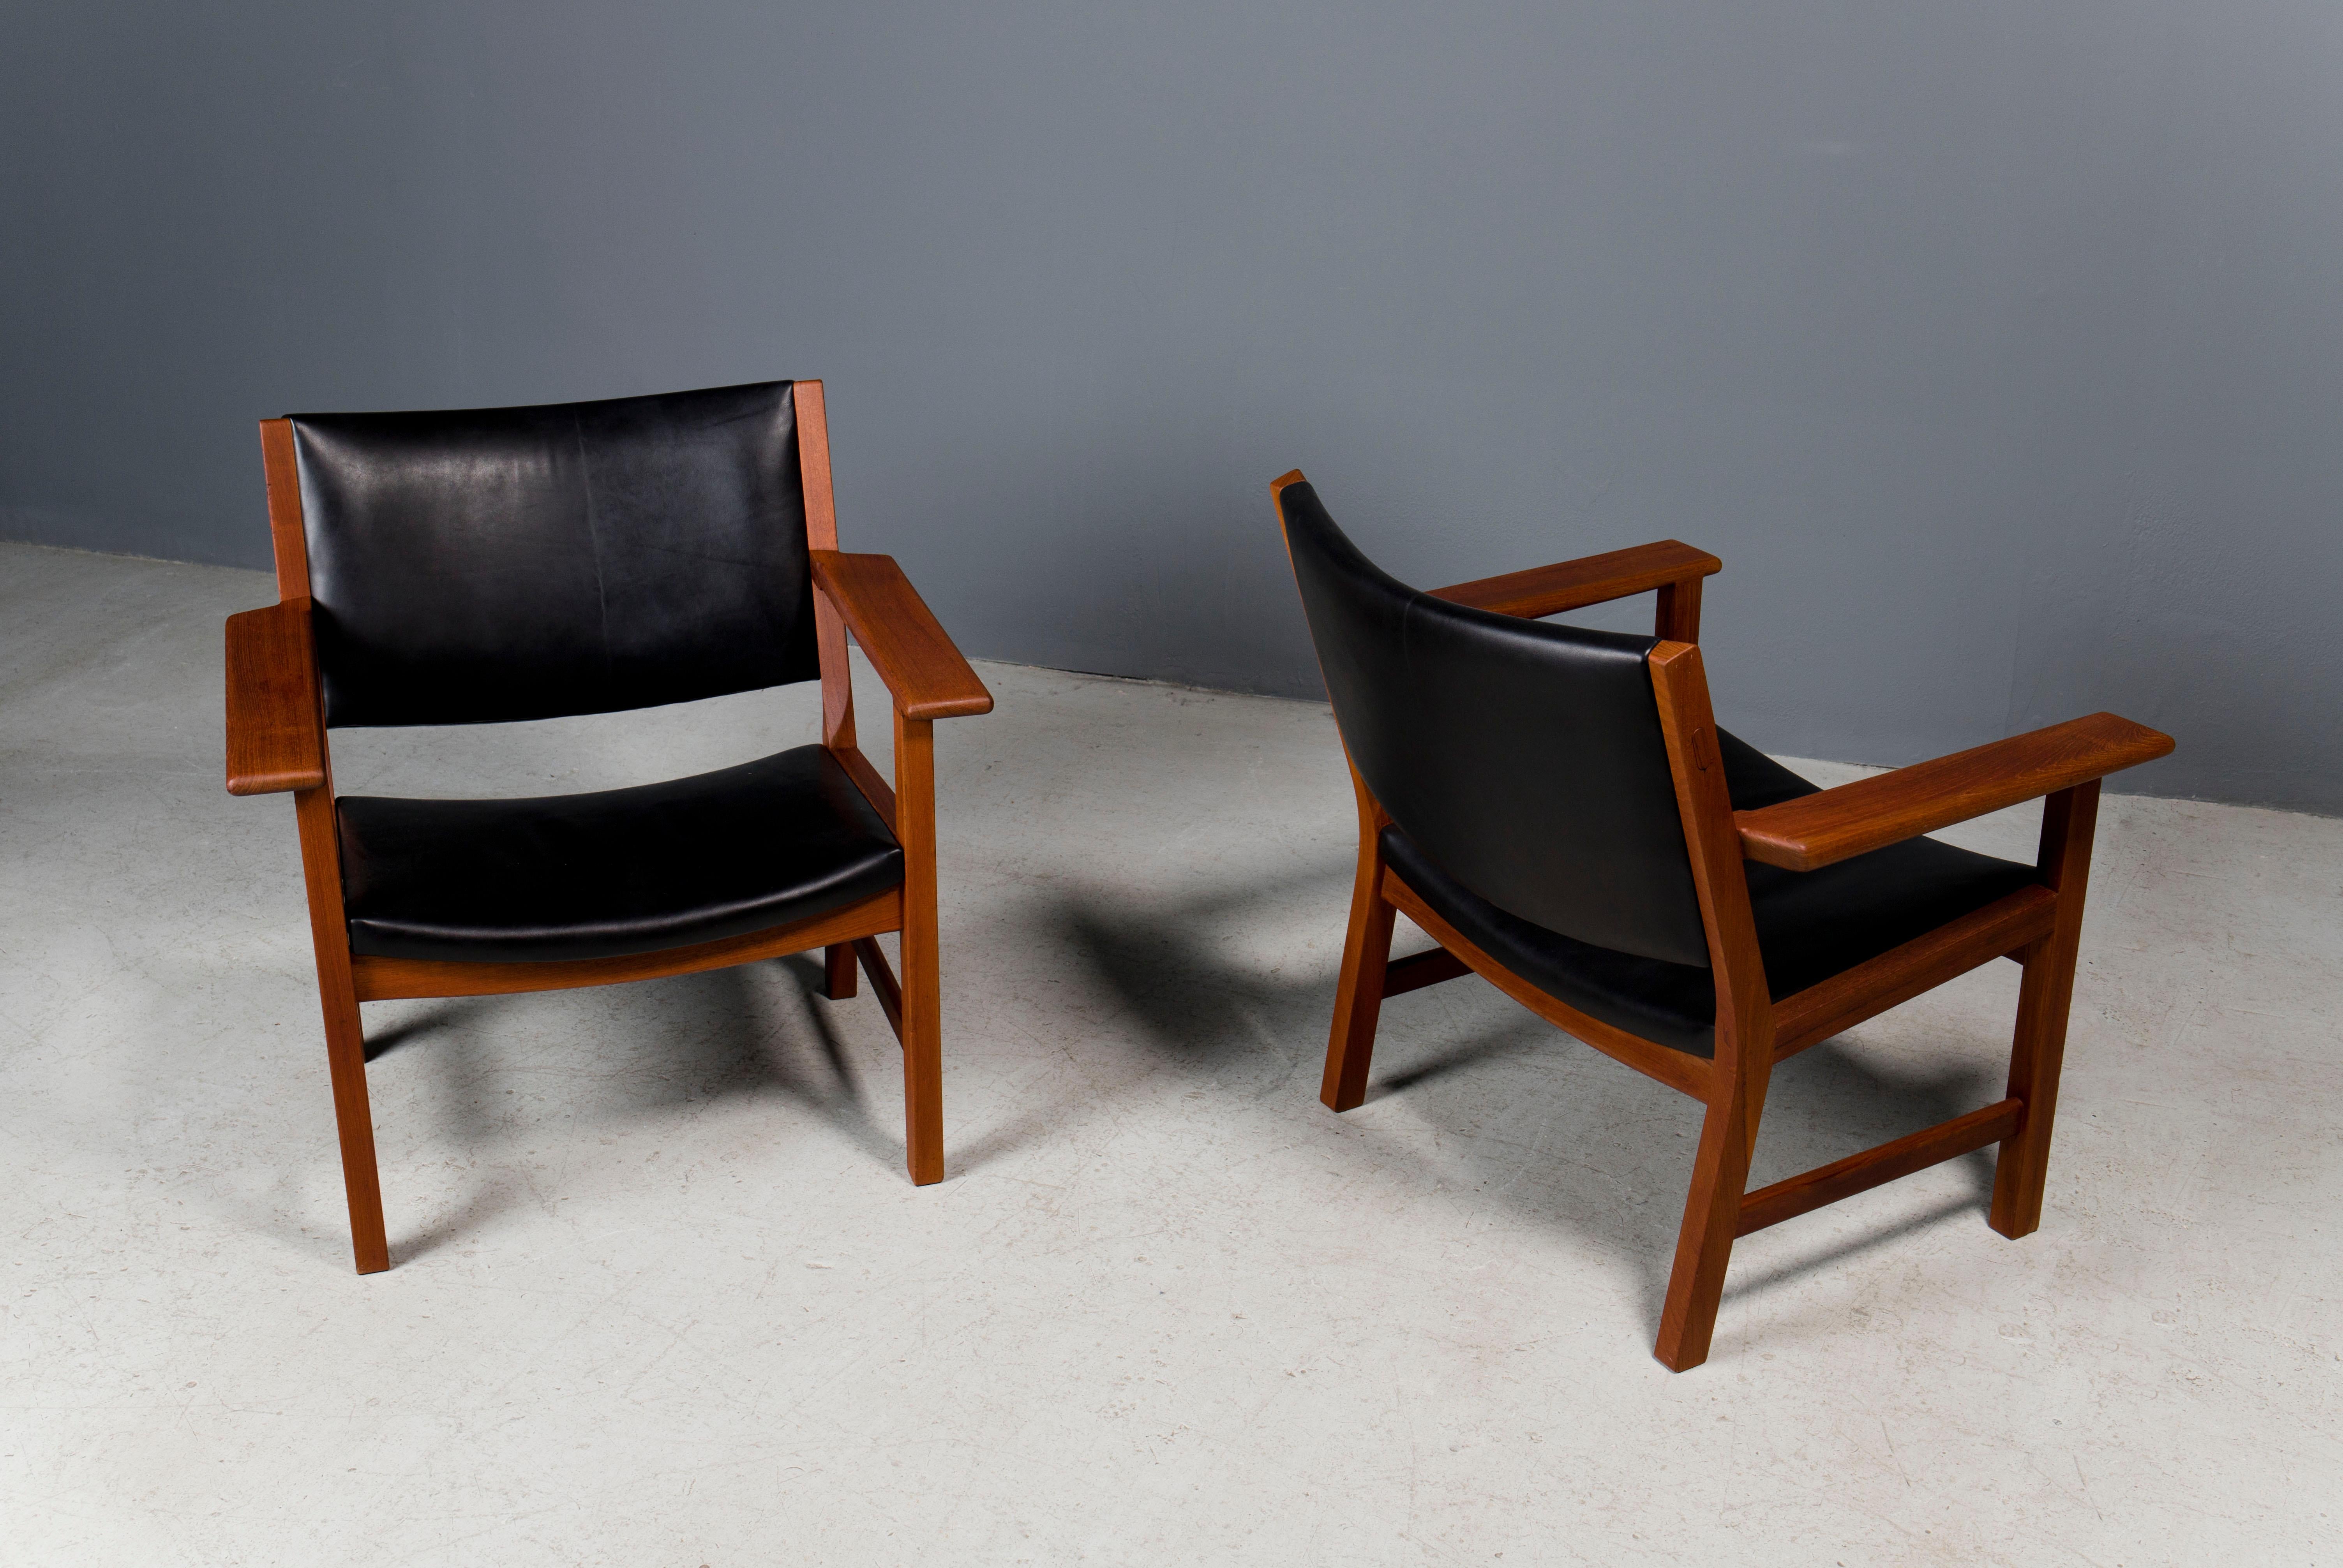 Rare pair of lounge chairs by Hans Wegner. They are in excellent vintage condition and upholstered in black leather.